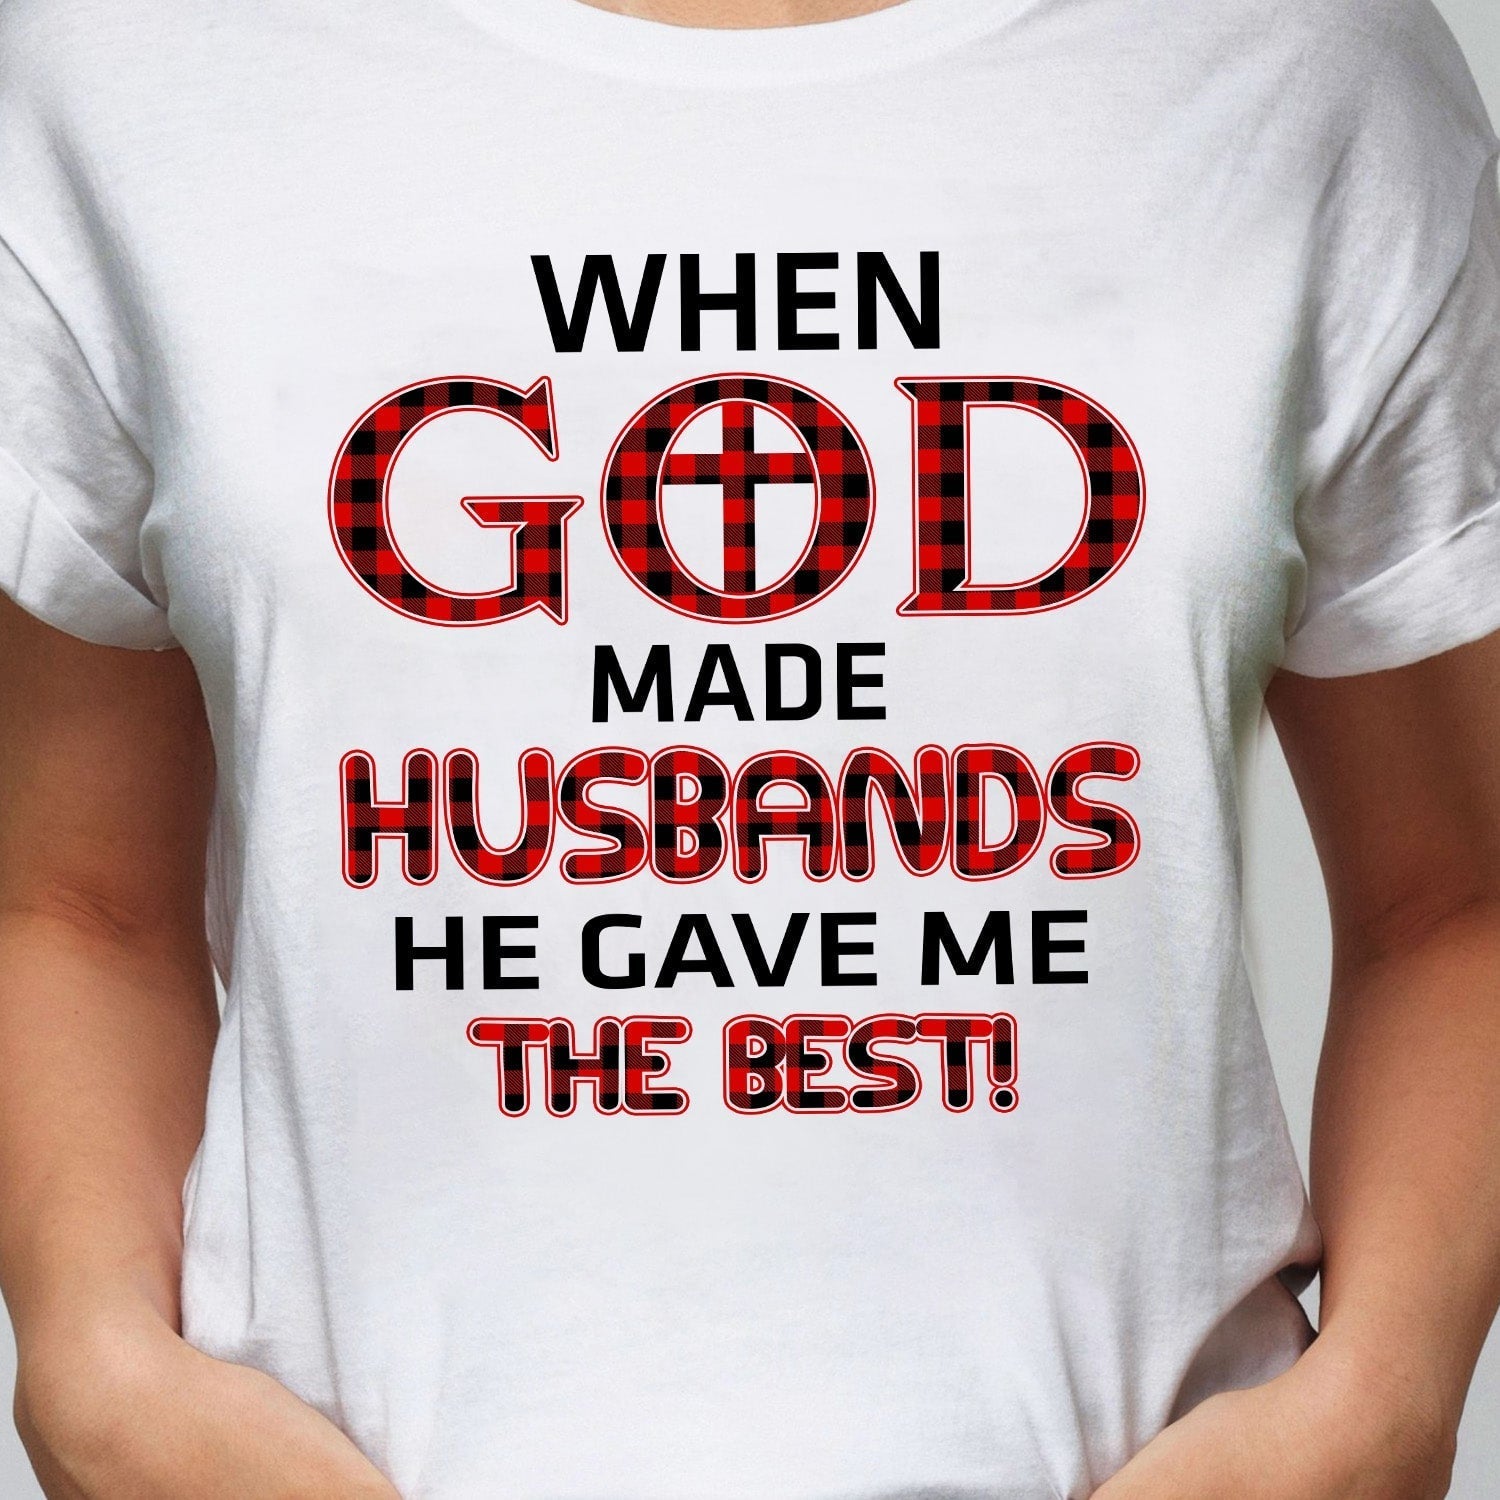 When god made husbands he gave me the best – Jesus T Shirt